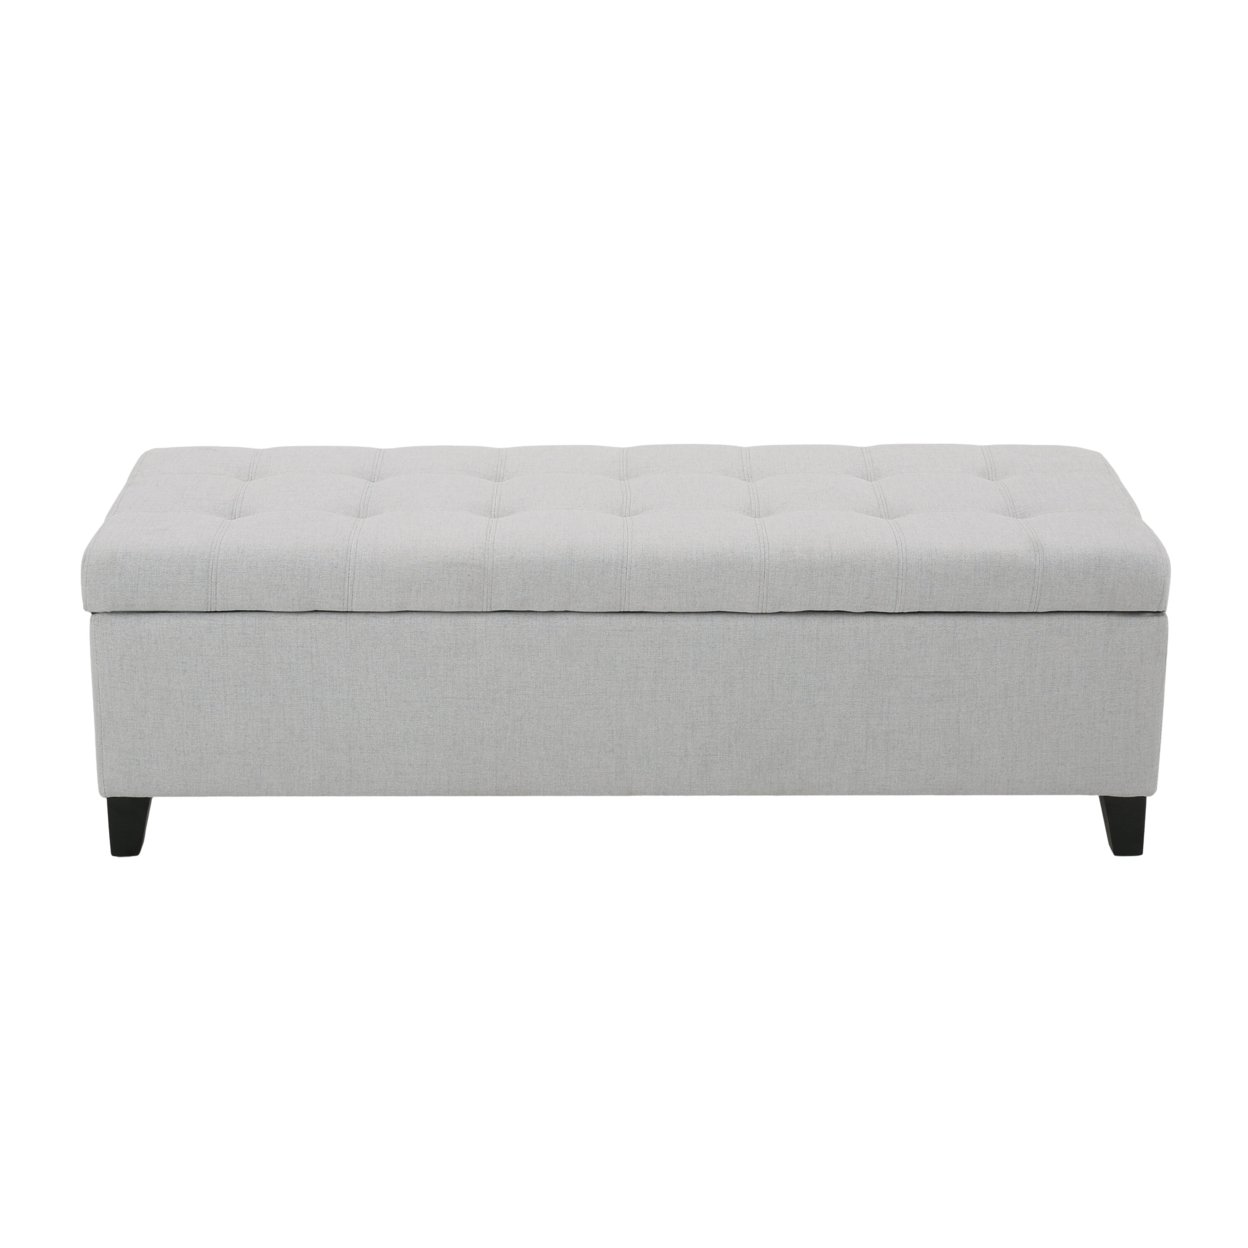 Sterling Fabric Tufted Storage Ottoman - Light Gray